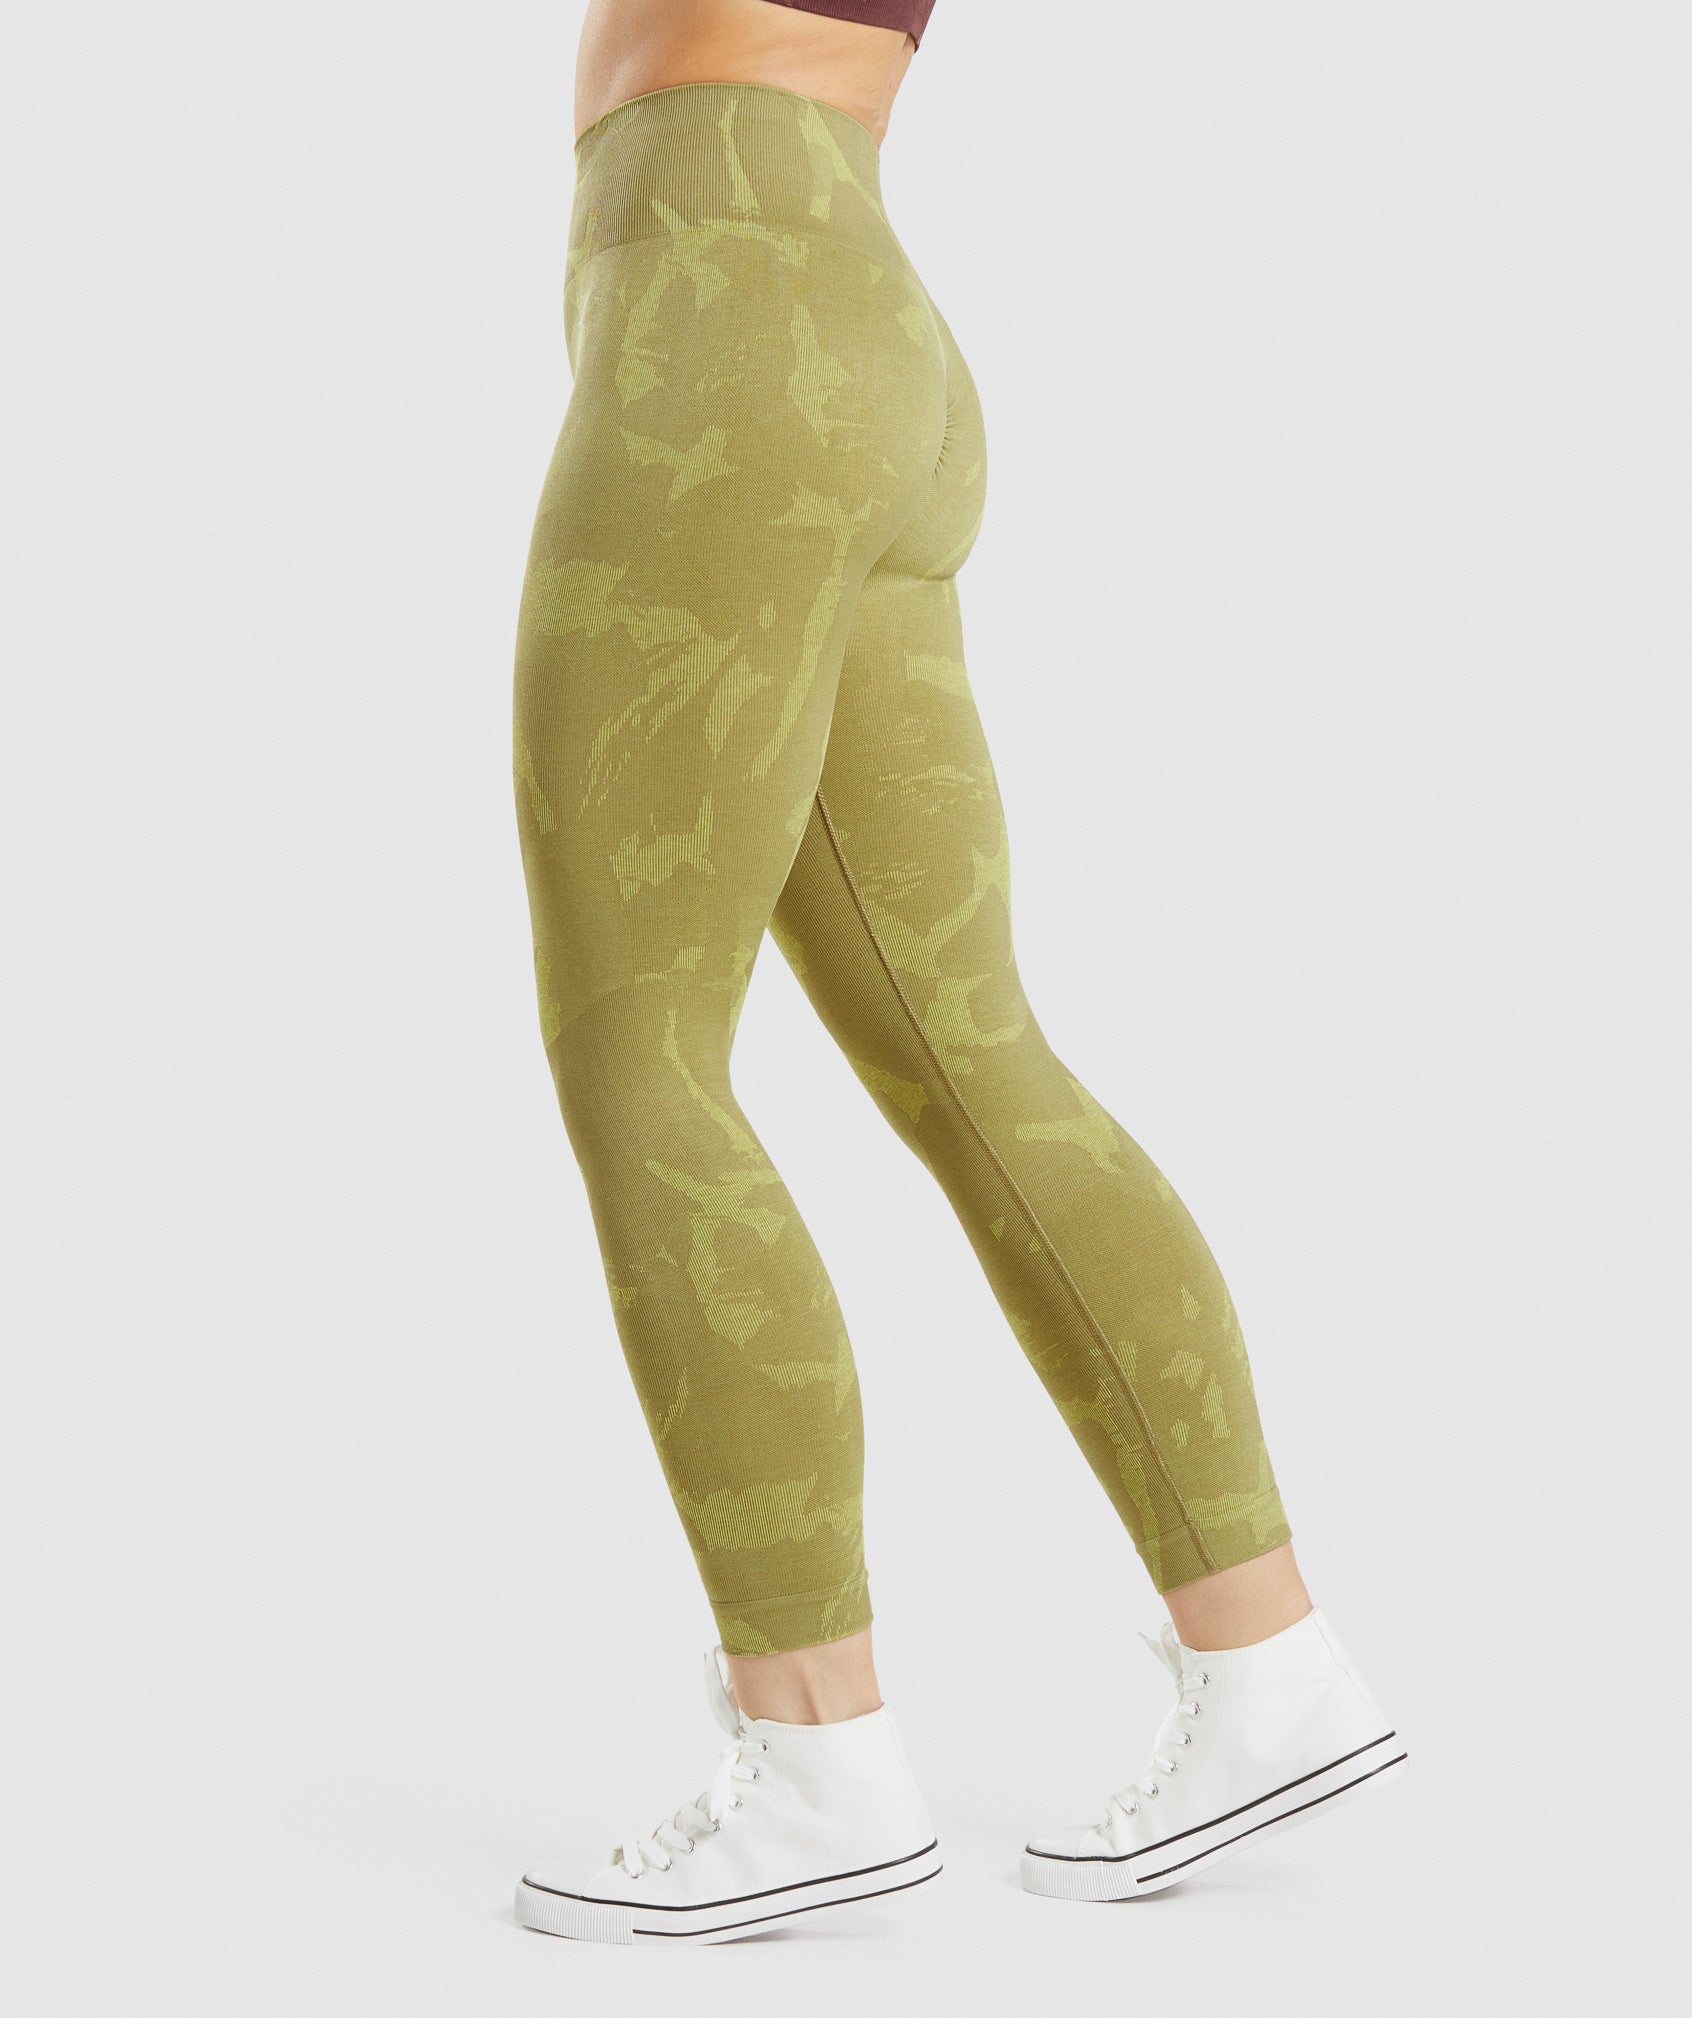 Leggings, Super Soft, Army Green, Size XXS and XS – Grimfrost